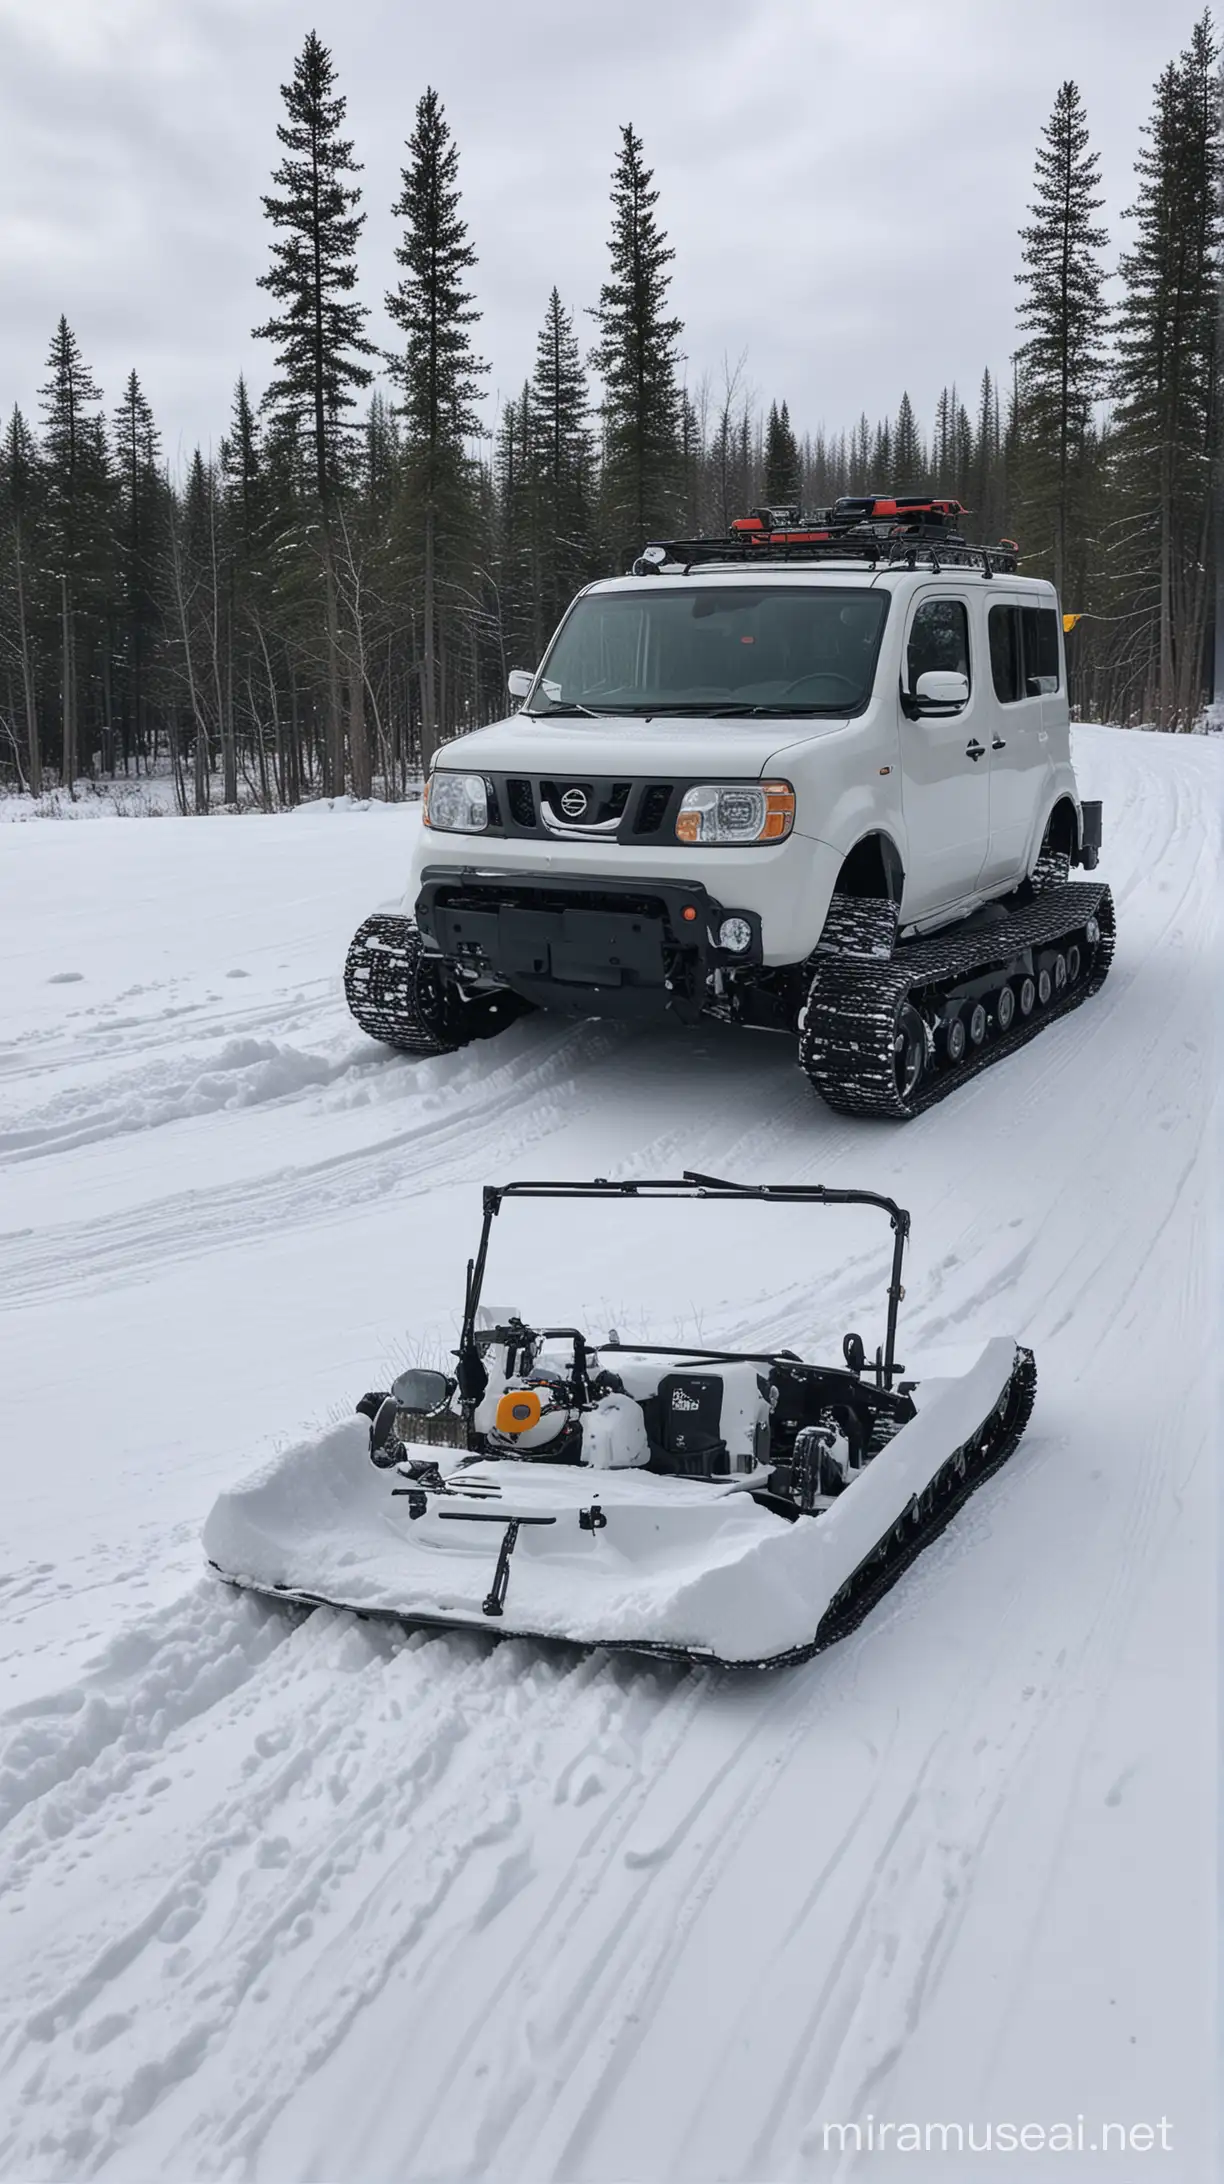 Snowy Adventure in a Nissan Cube Snowcat Tracked Vehicle